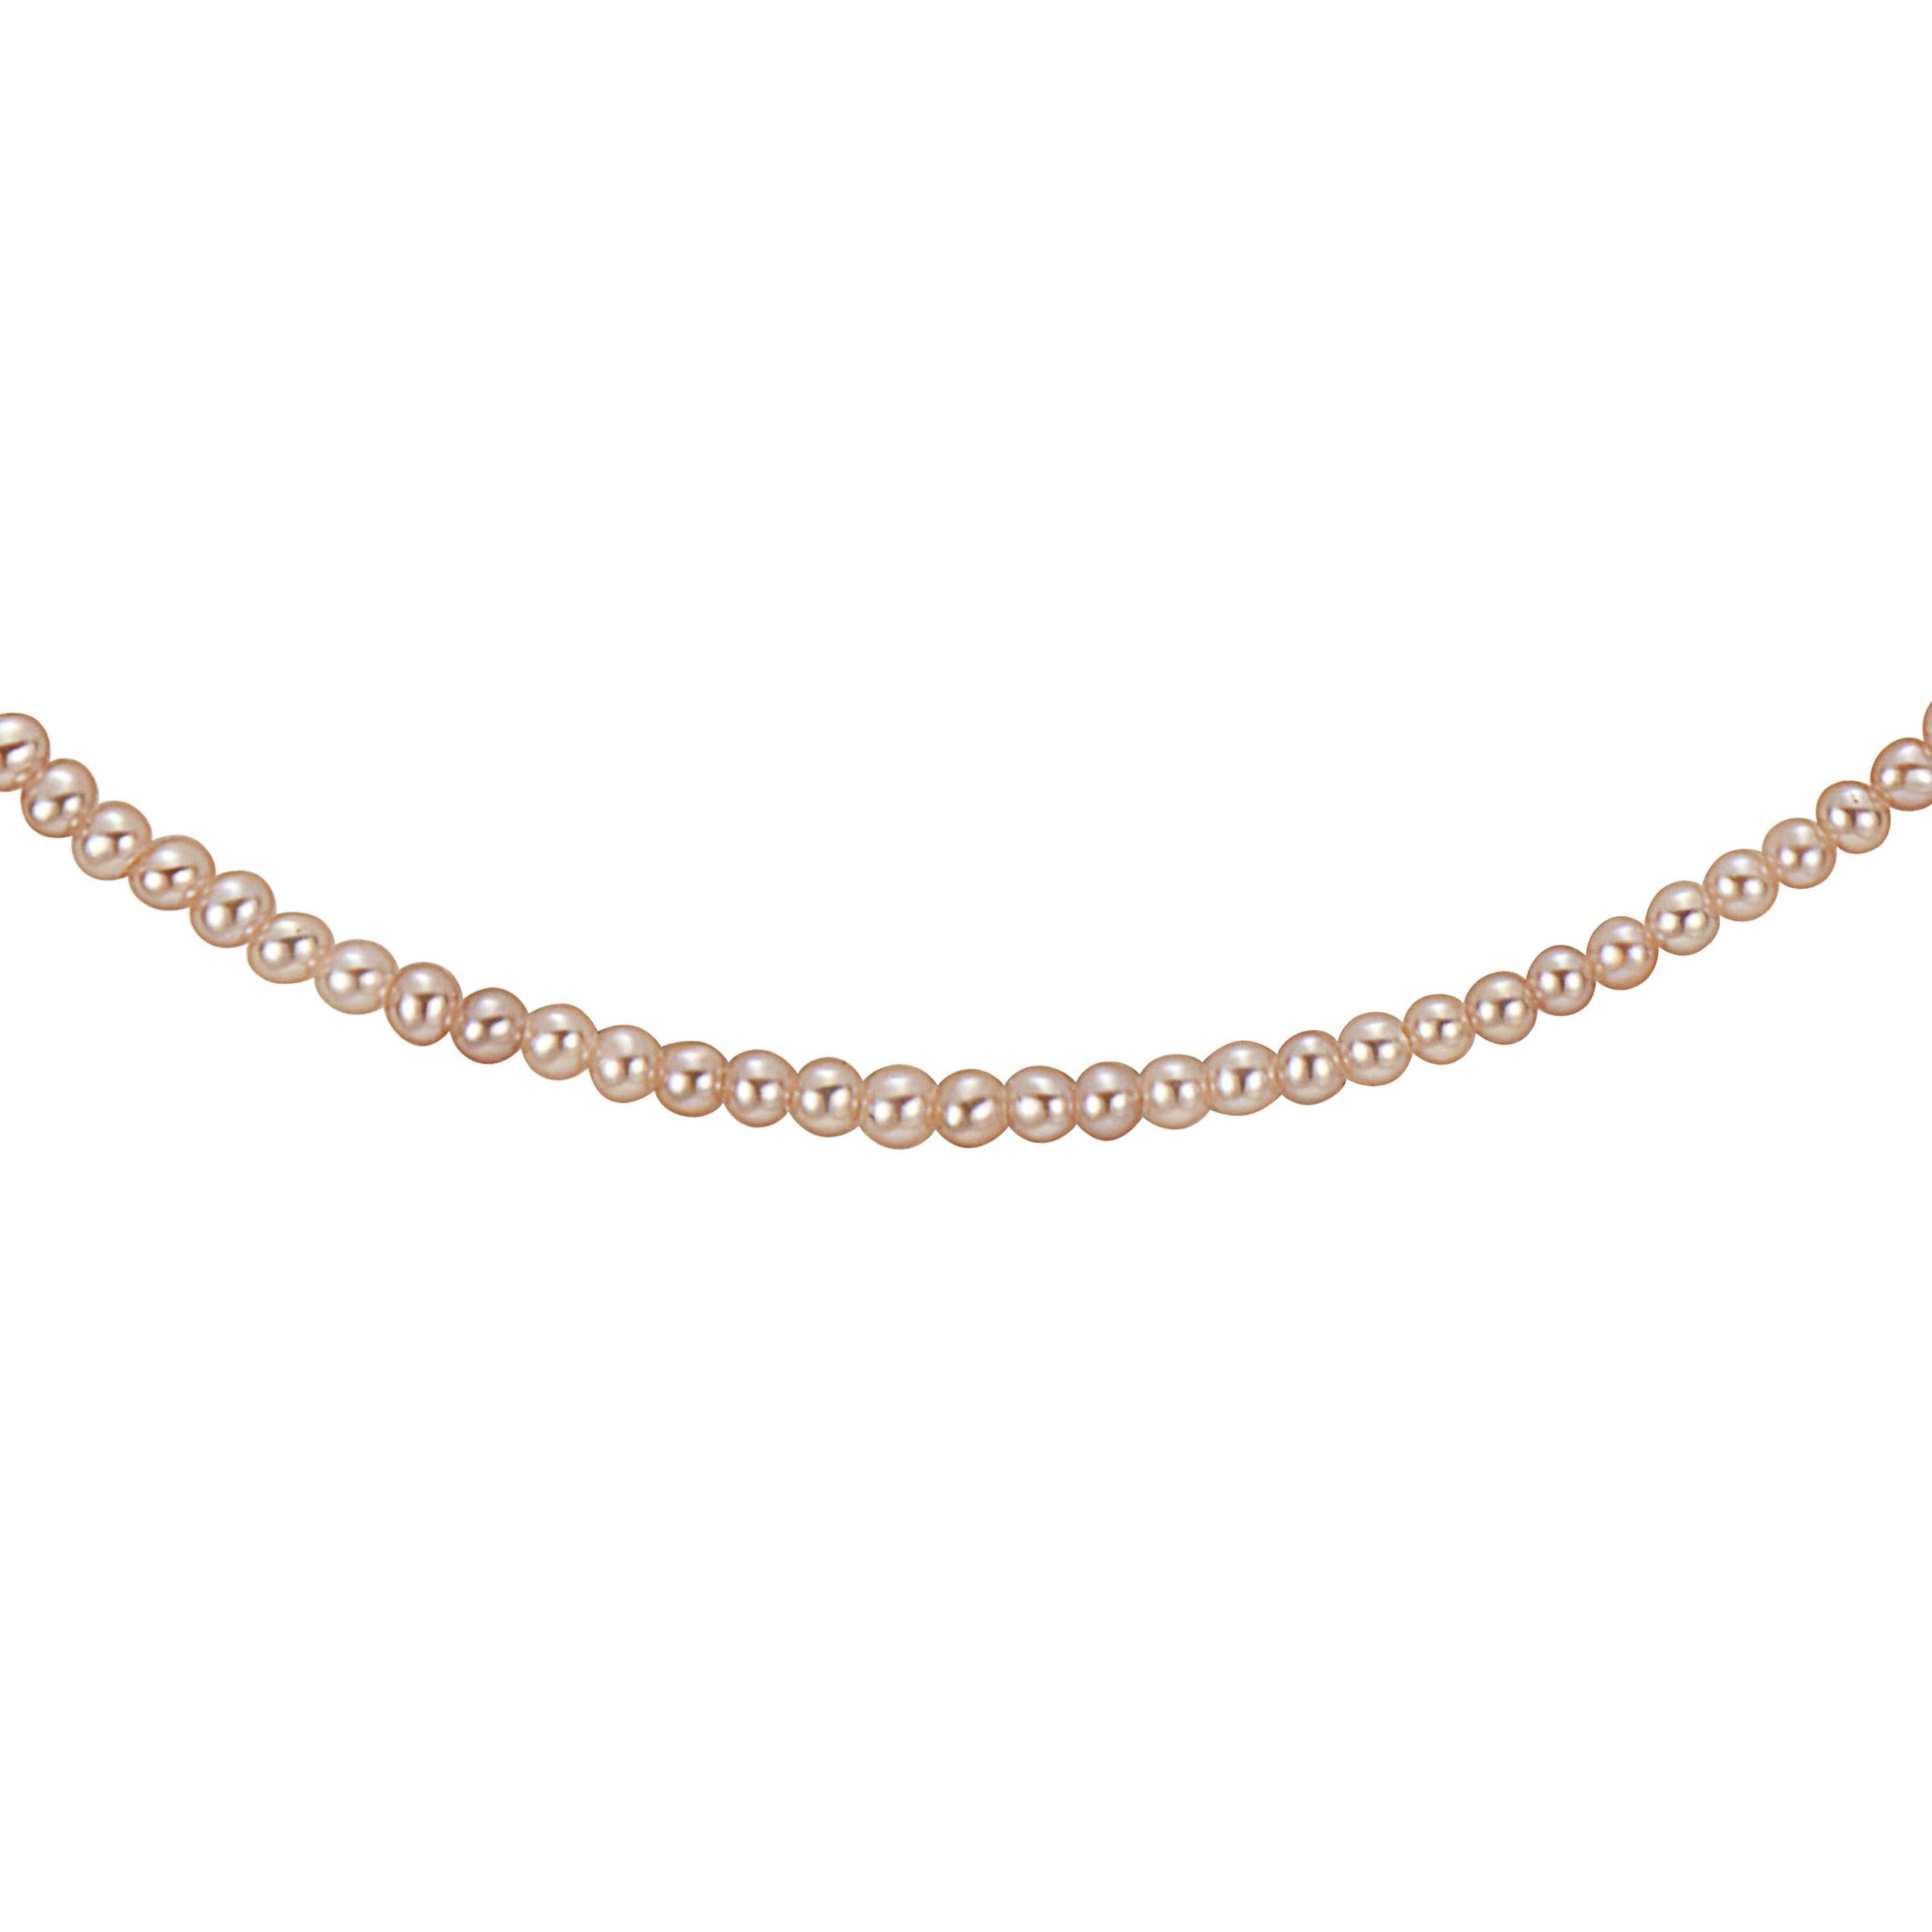 This natural pink color Chinese Freshwater cultured pearl necklace features fine quality, high luster 2-2.5mm pearls. The necklace is strung to 18 inch length with a 14K yellow gold lobster claw clasp. 
Featuring high quality, lustrous, pink Chinese